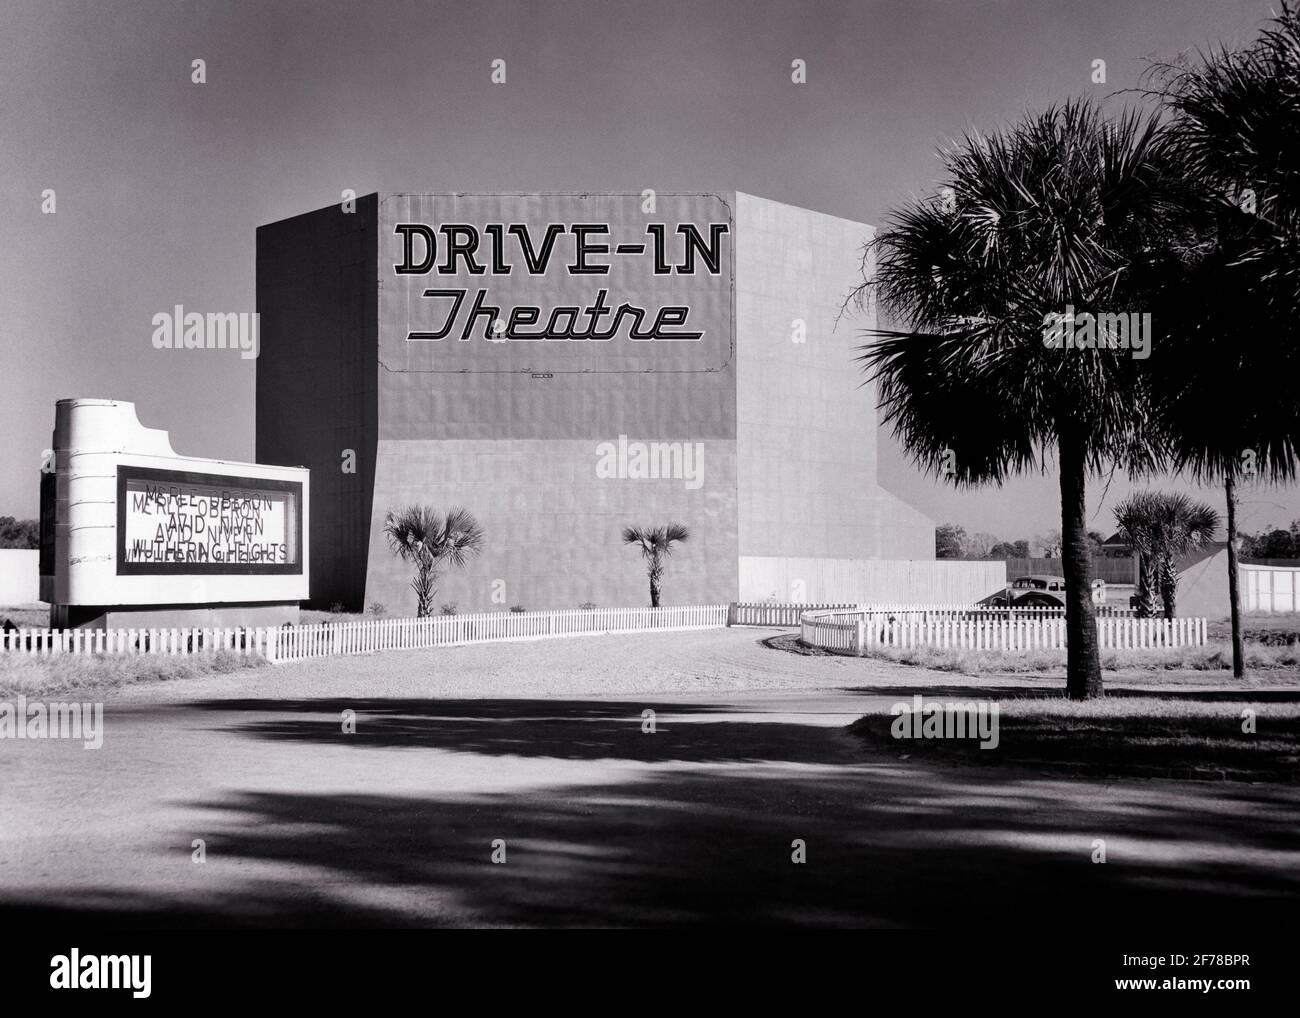 1930s 1940s THE VICTORY DRIVE-IN MOVIE THEATRE TORN DOWN 1978 FOR A STRIP MALL WUTHERING HEIGHTS ON MARQUEE SAVANNAH GEORGIA USA - r13005 PUN001 HARS 1978 CONCEPTUAL STILL LIFE ESCAPE SOUTHEASTERN STRIP MOTION PICTURE MOTION PICTURES DAVID NIVEN DRIVE-IN BLACK AND WHITE GA OLD FASHIONED Stock Photo